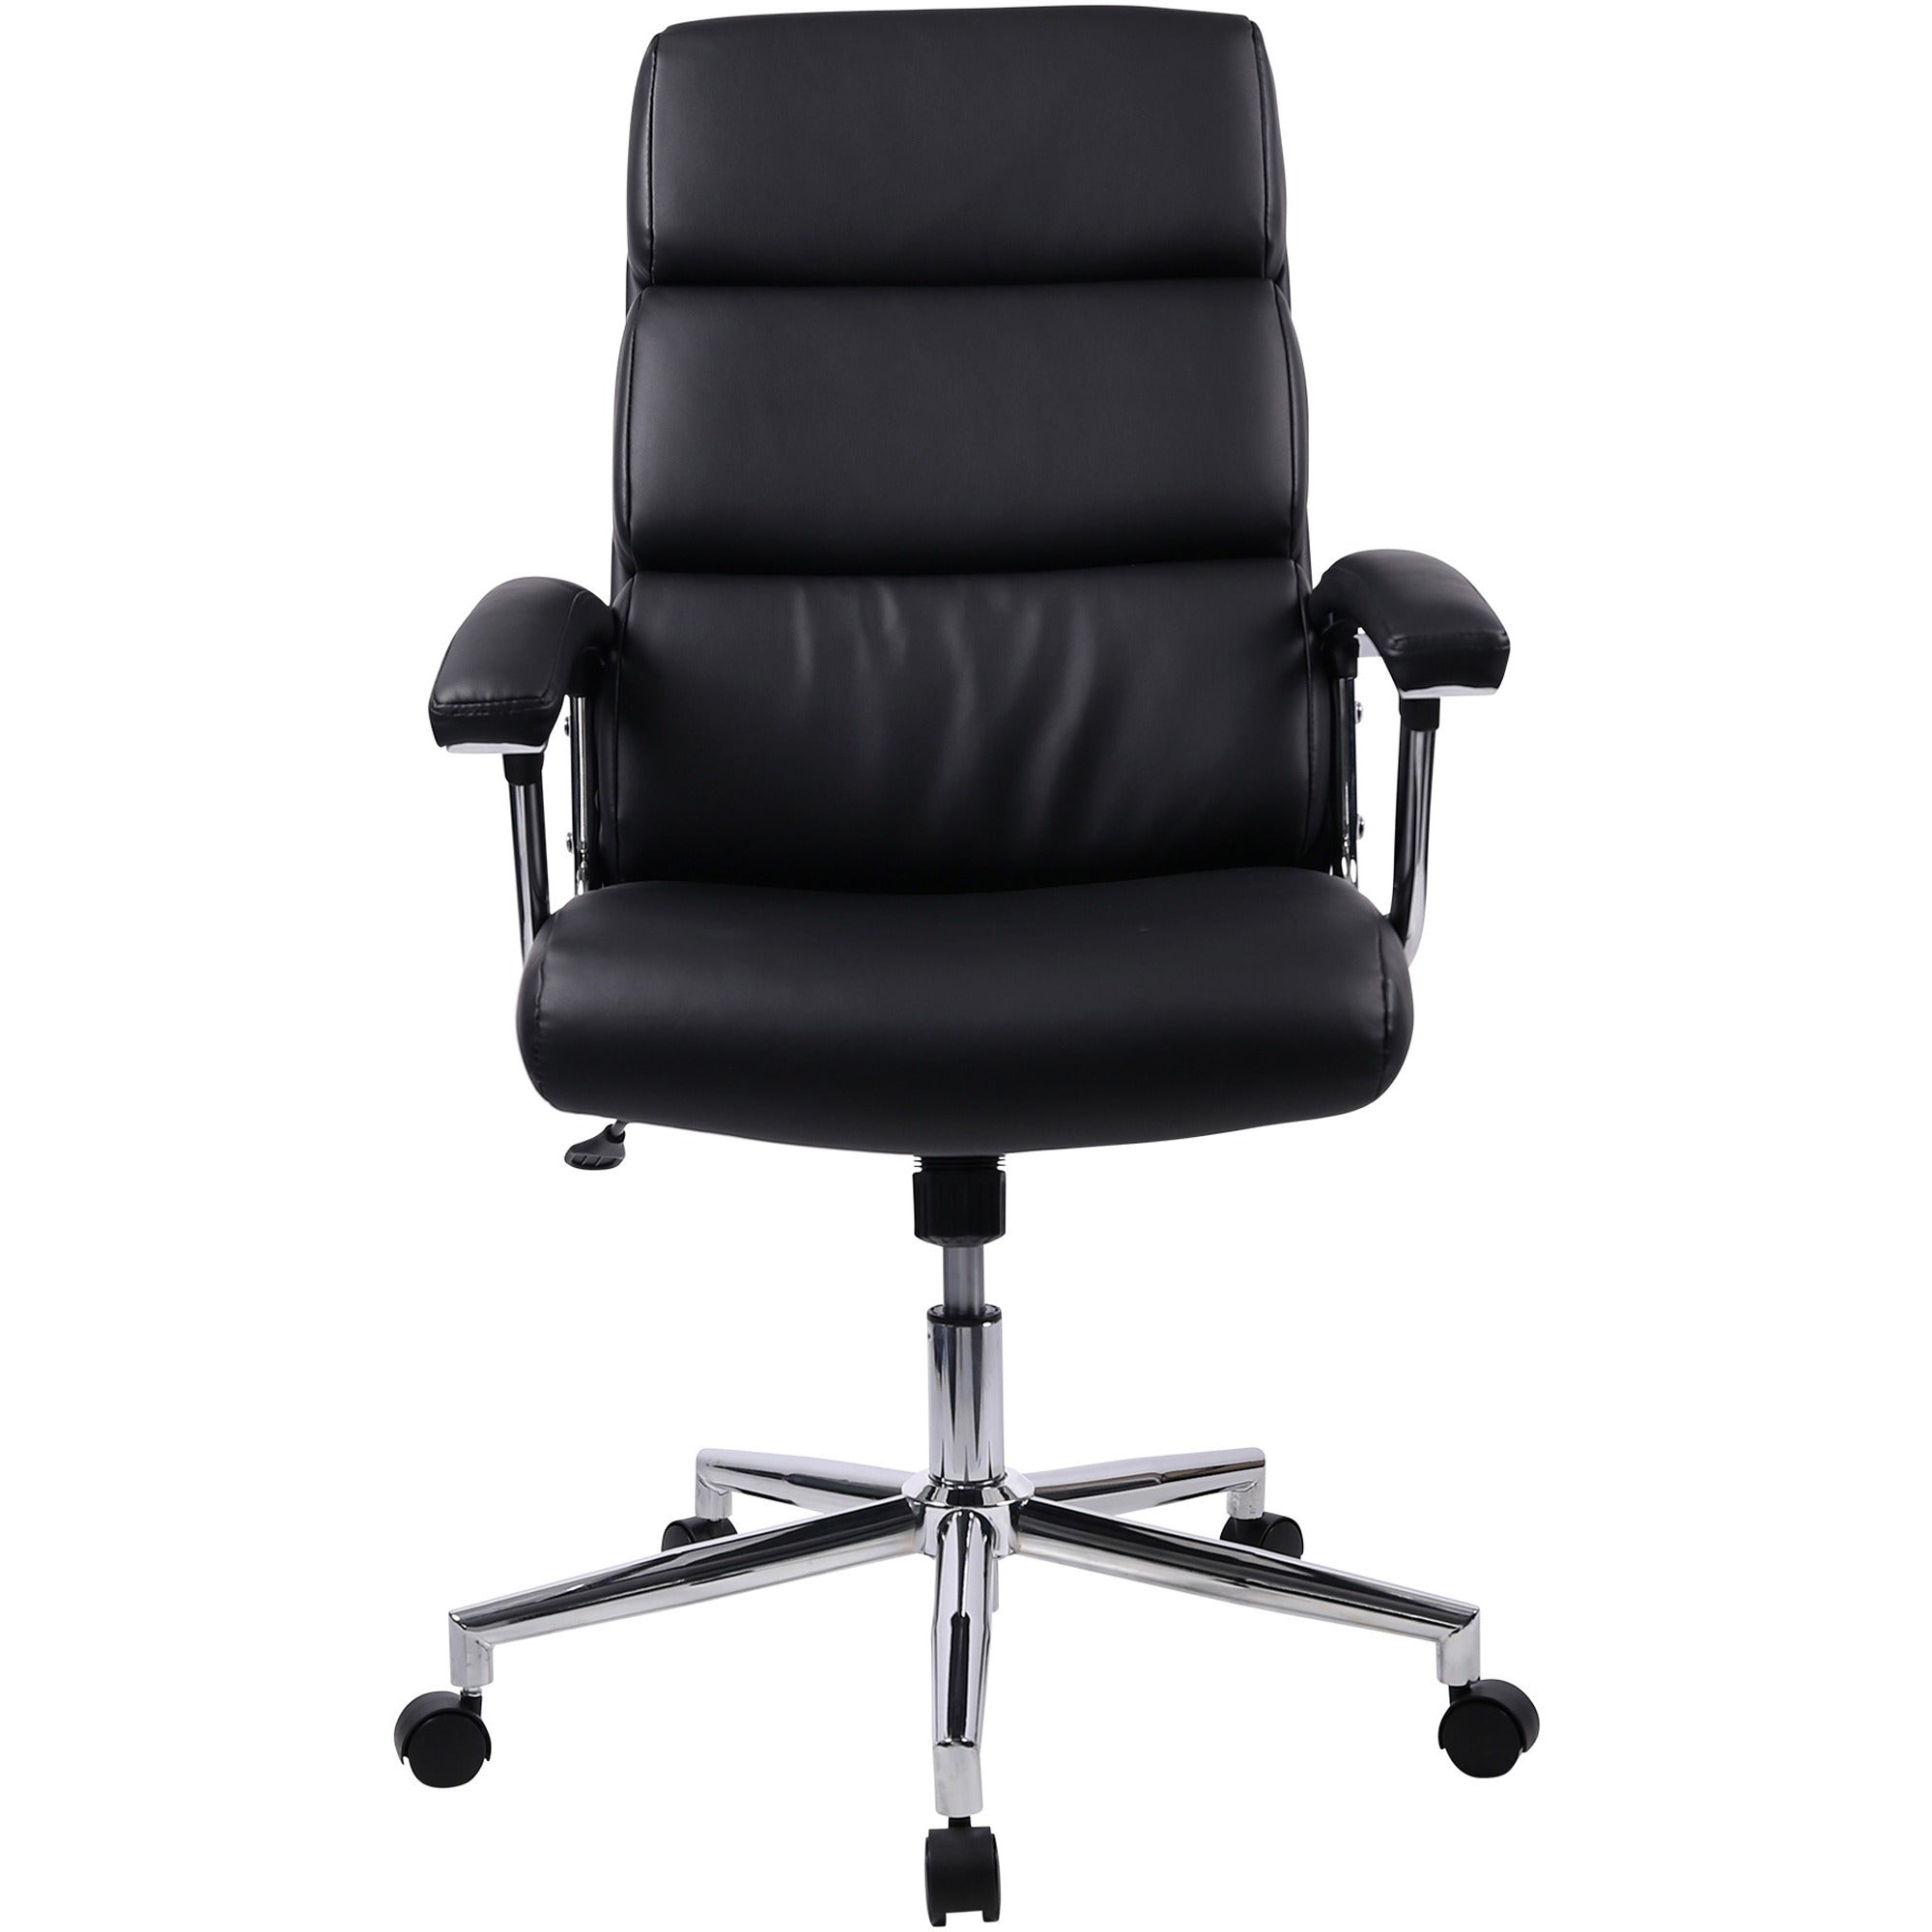 Lorell High-back Office Chair - Black Bonded Leather Seat - Black Bonded Leather Back - 1 Each - 